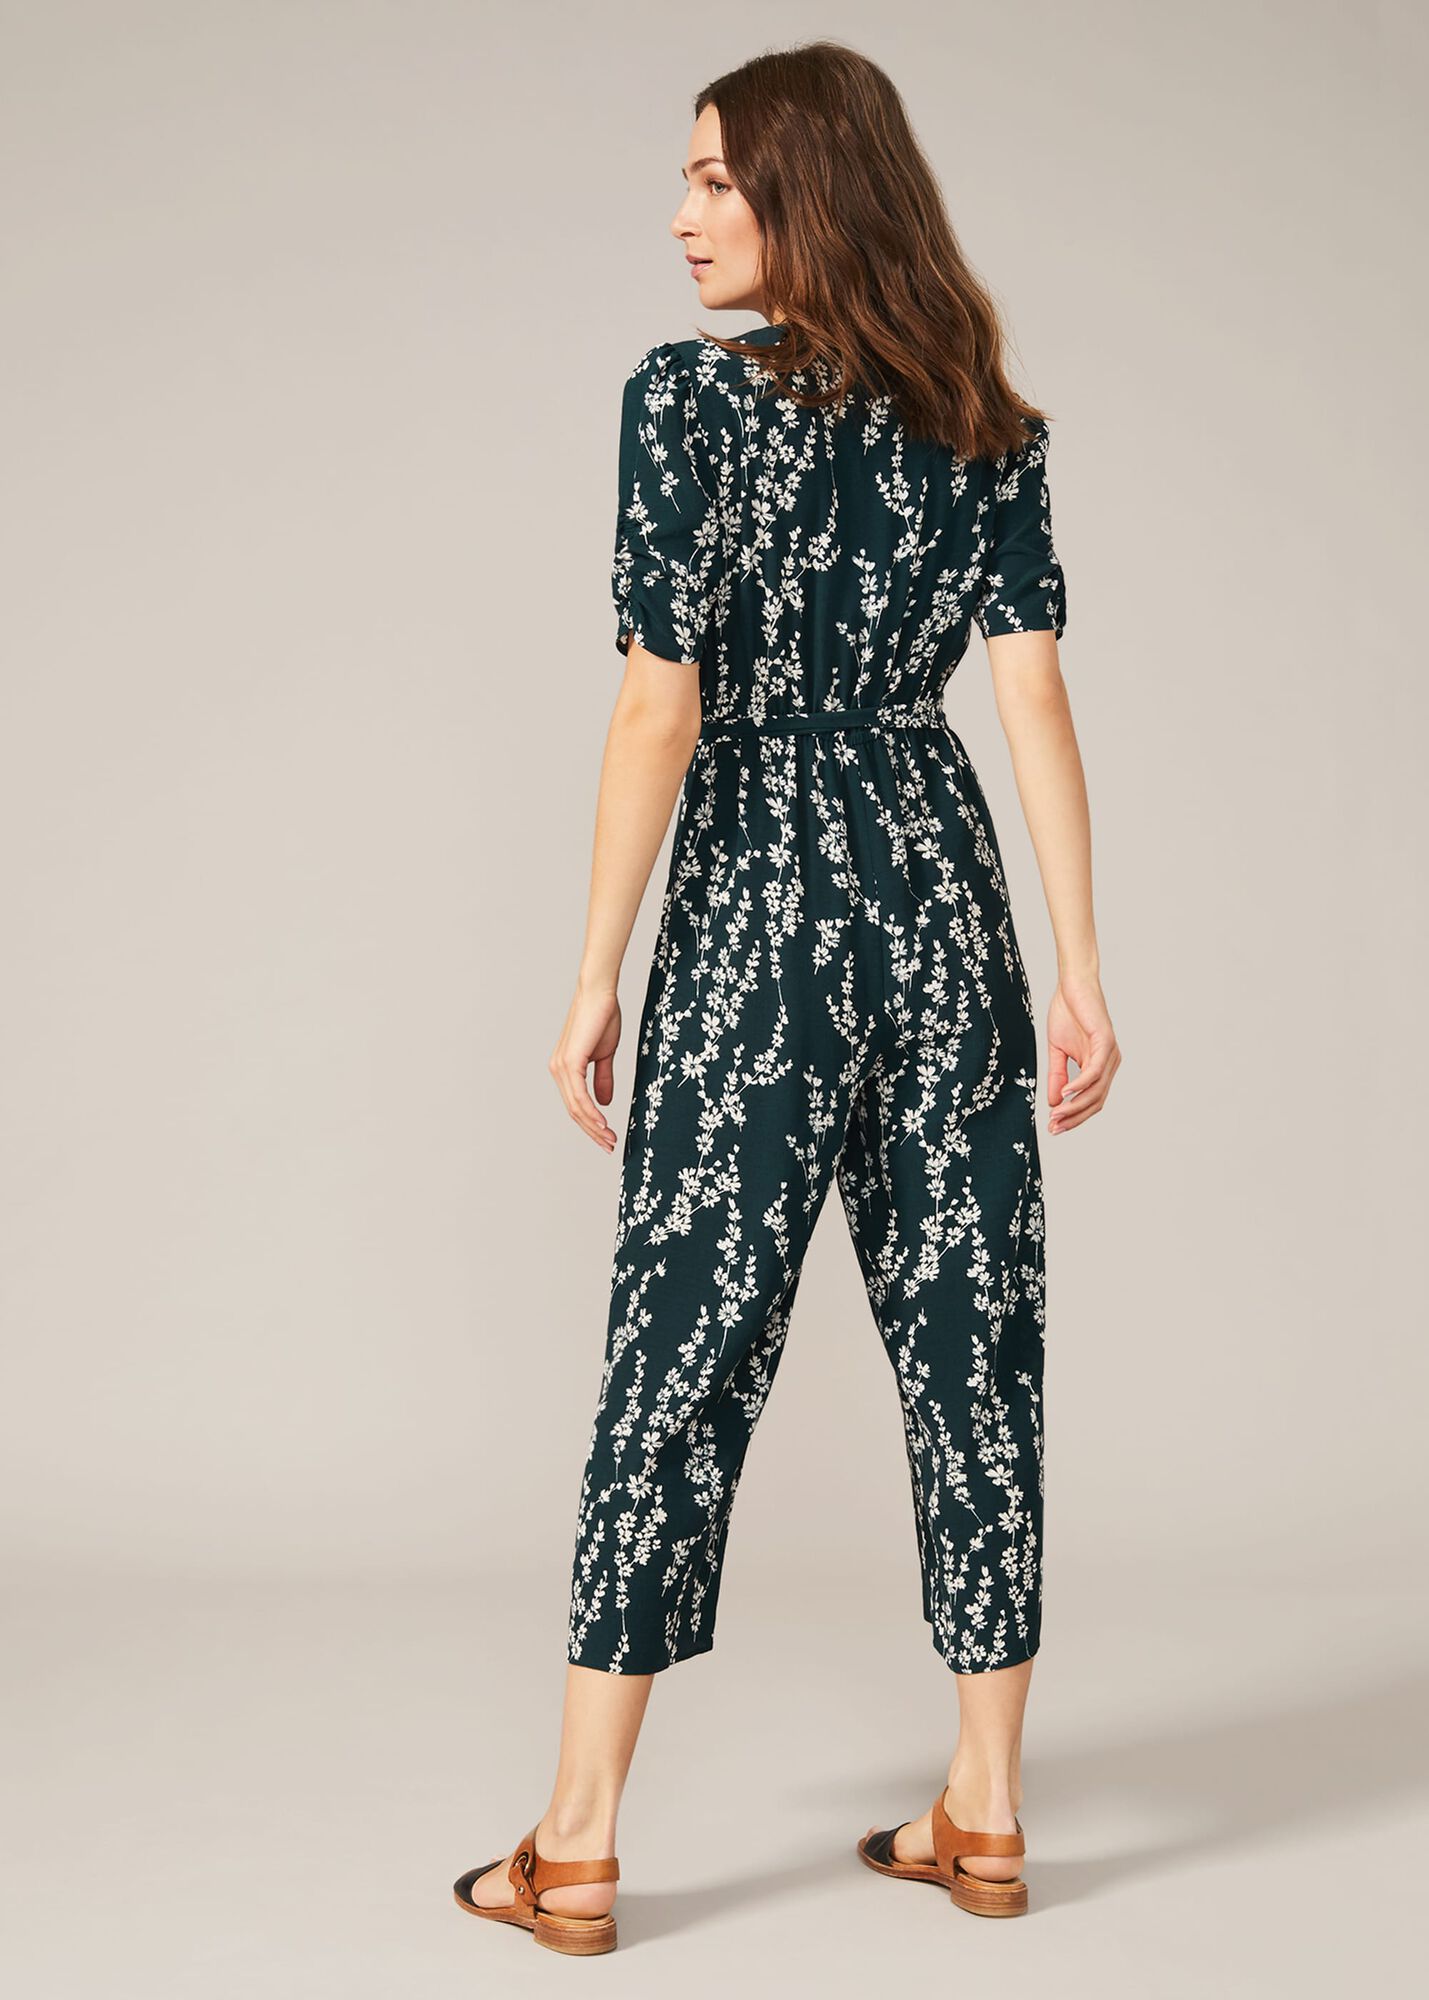 Jean Floral Jumpsuit | Phase Eight